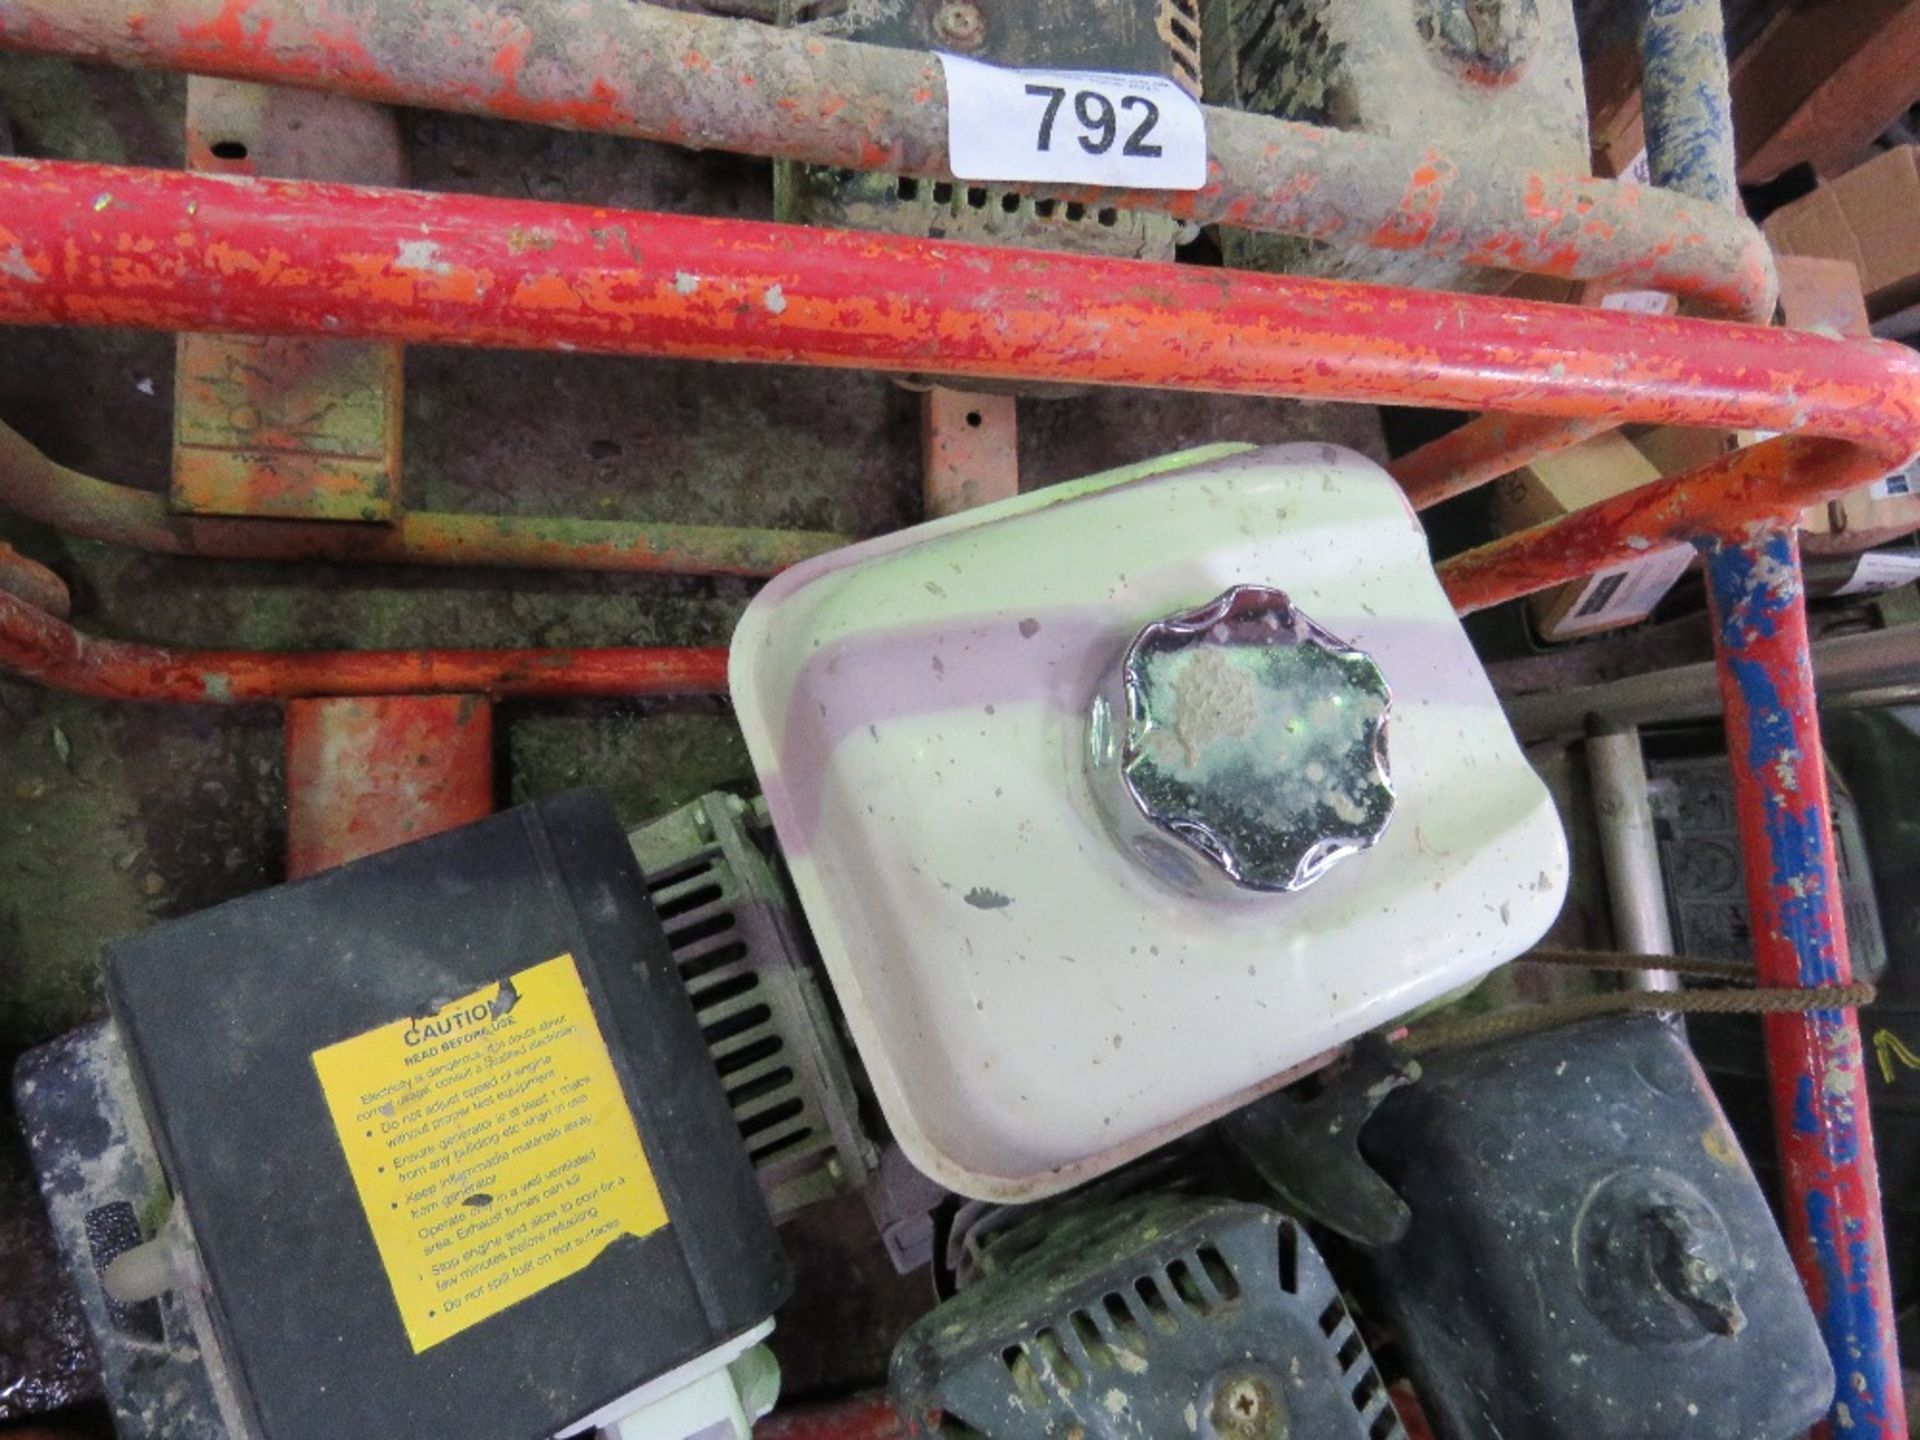 PETROL ENGINED GENERATOR, SPARES/REPAIR. UNTESTED, CONDITION UNKNOWN. - Image 3 of 3